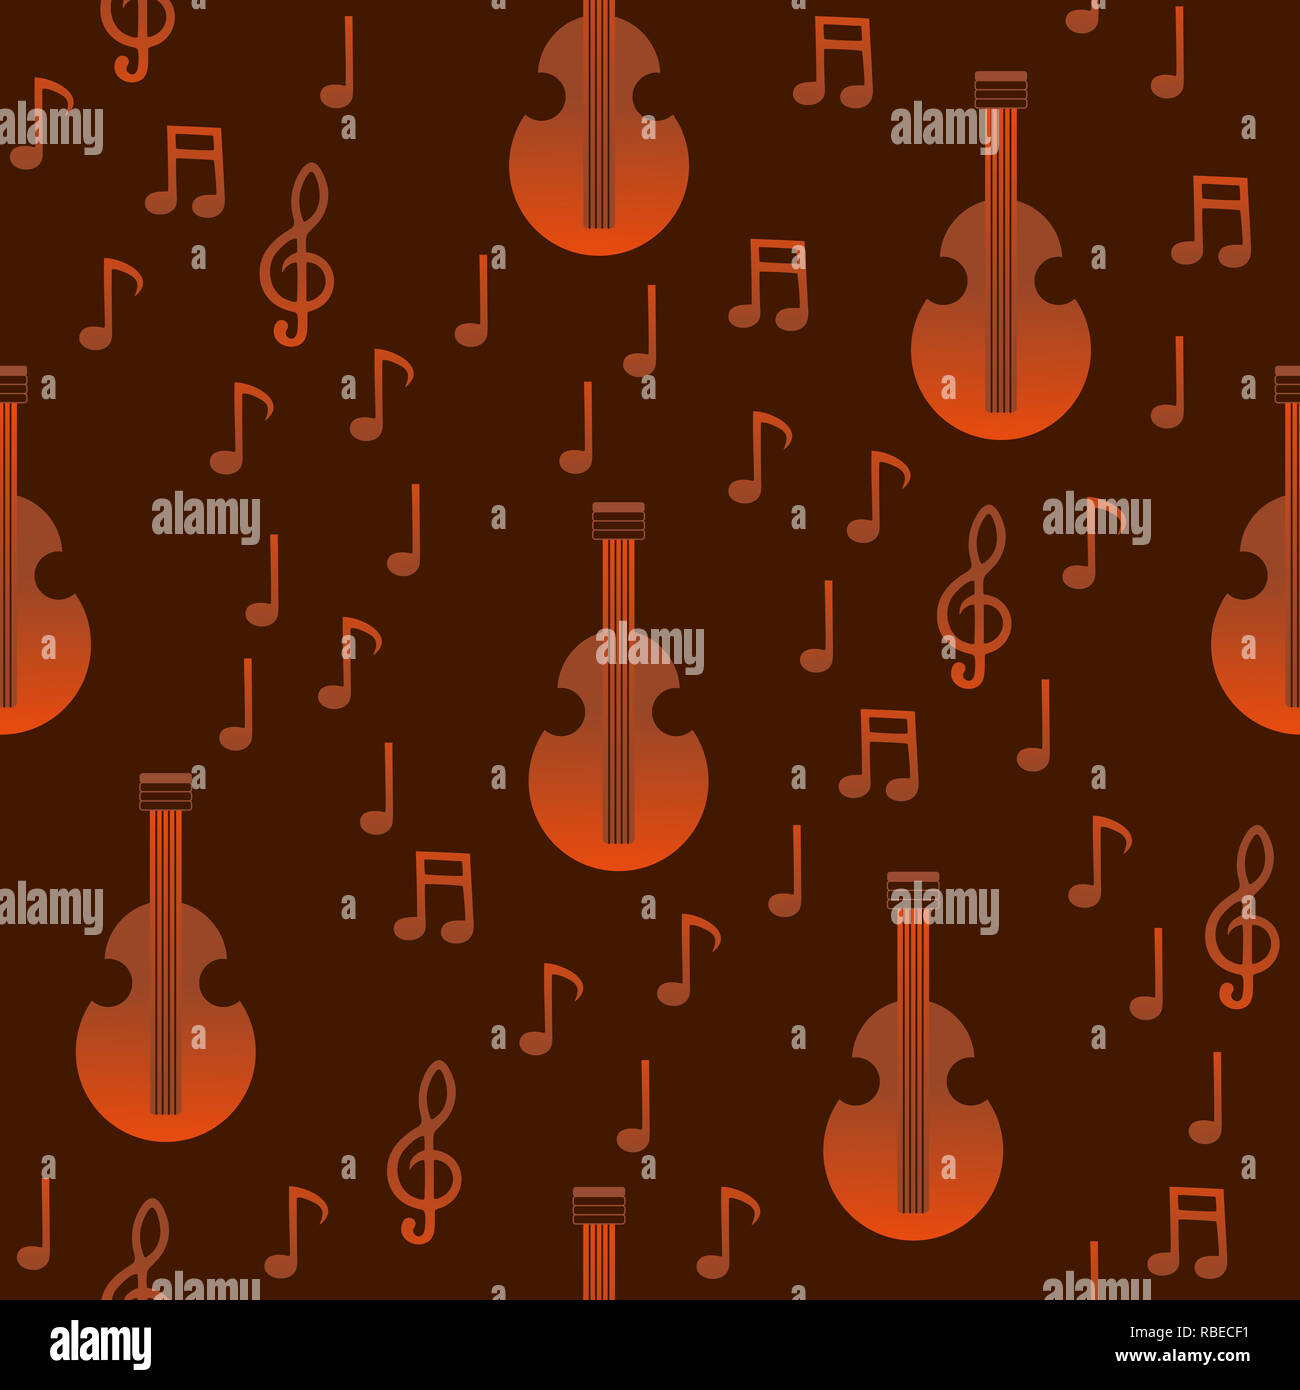 Vector music orange-brown pattern with notes and musical instruments Stock Photo